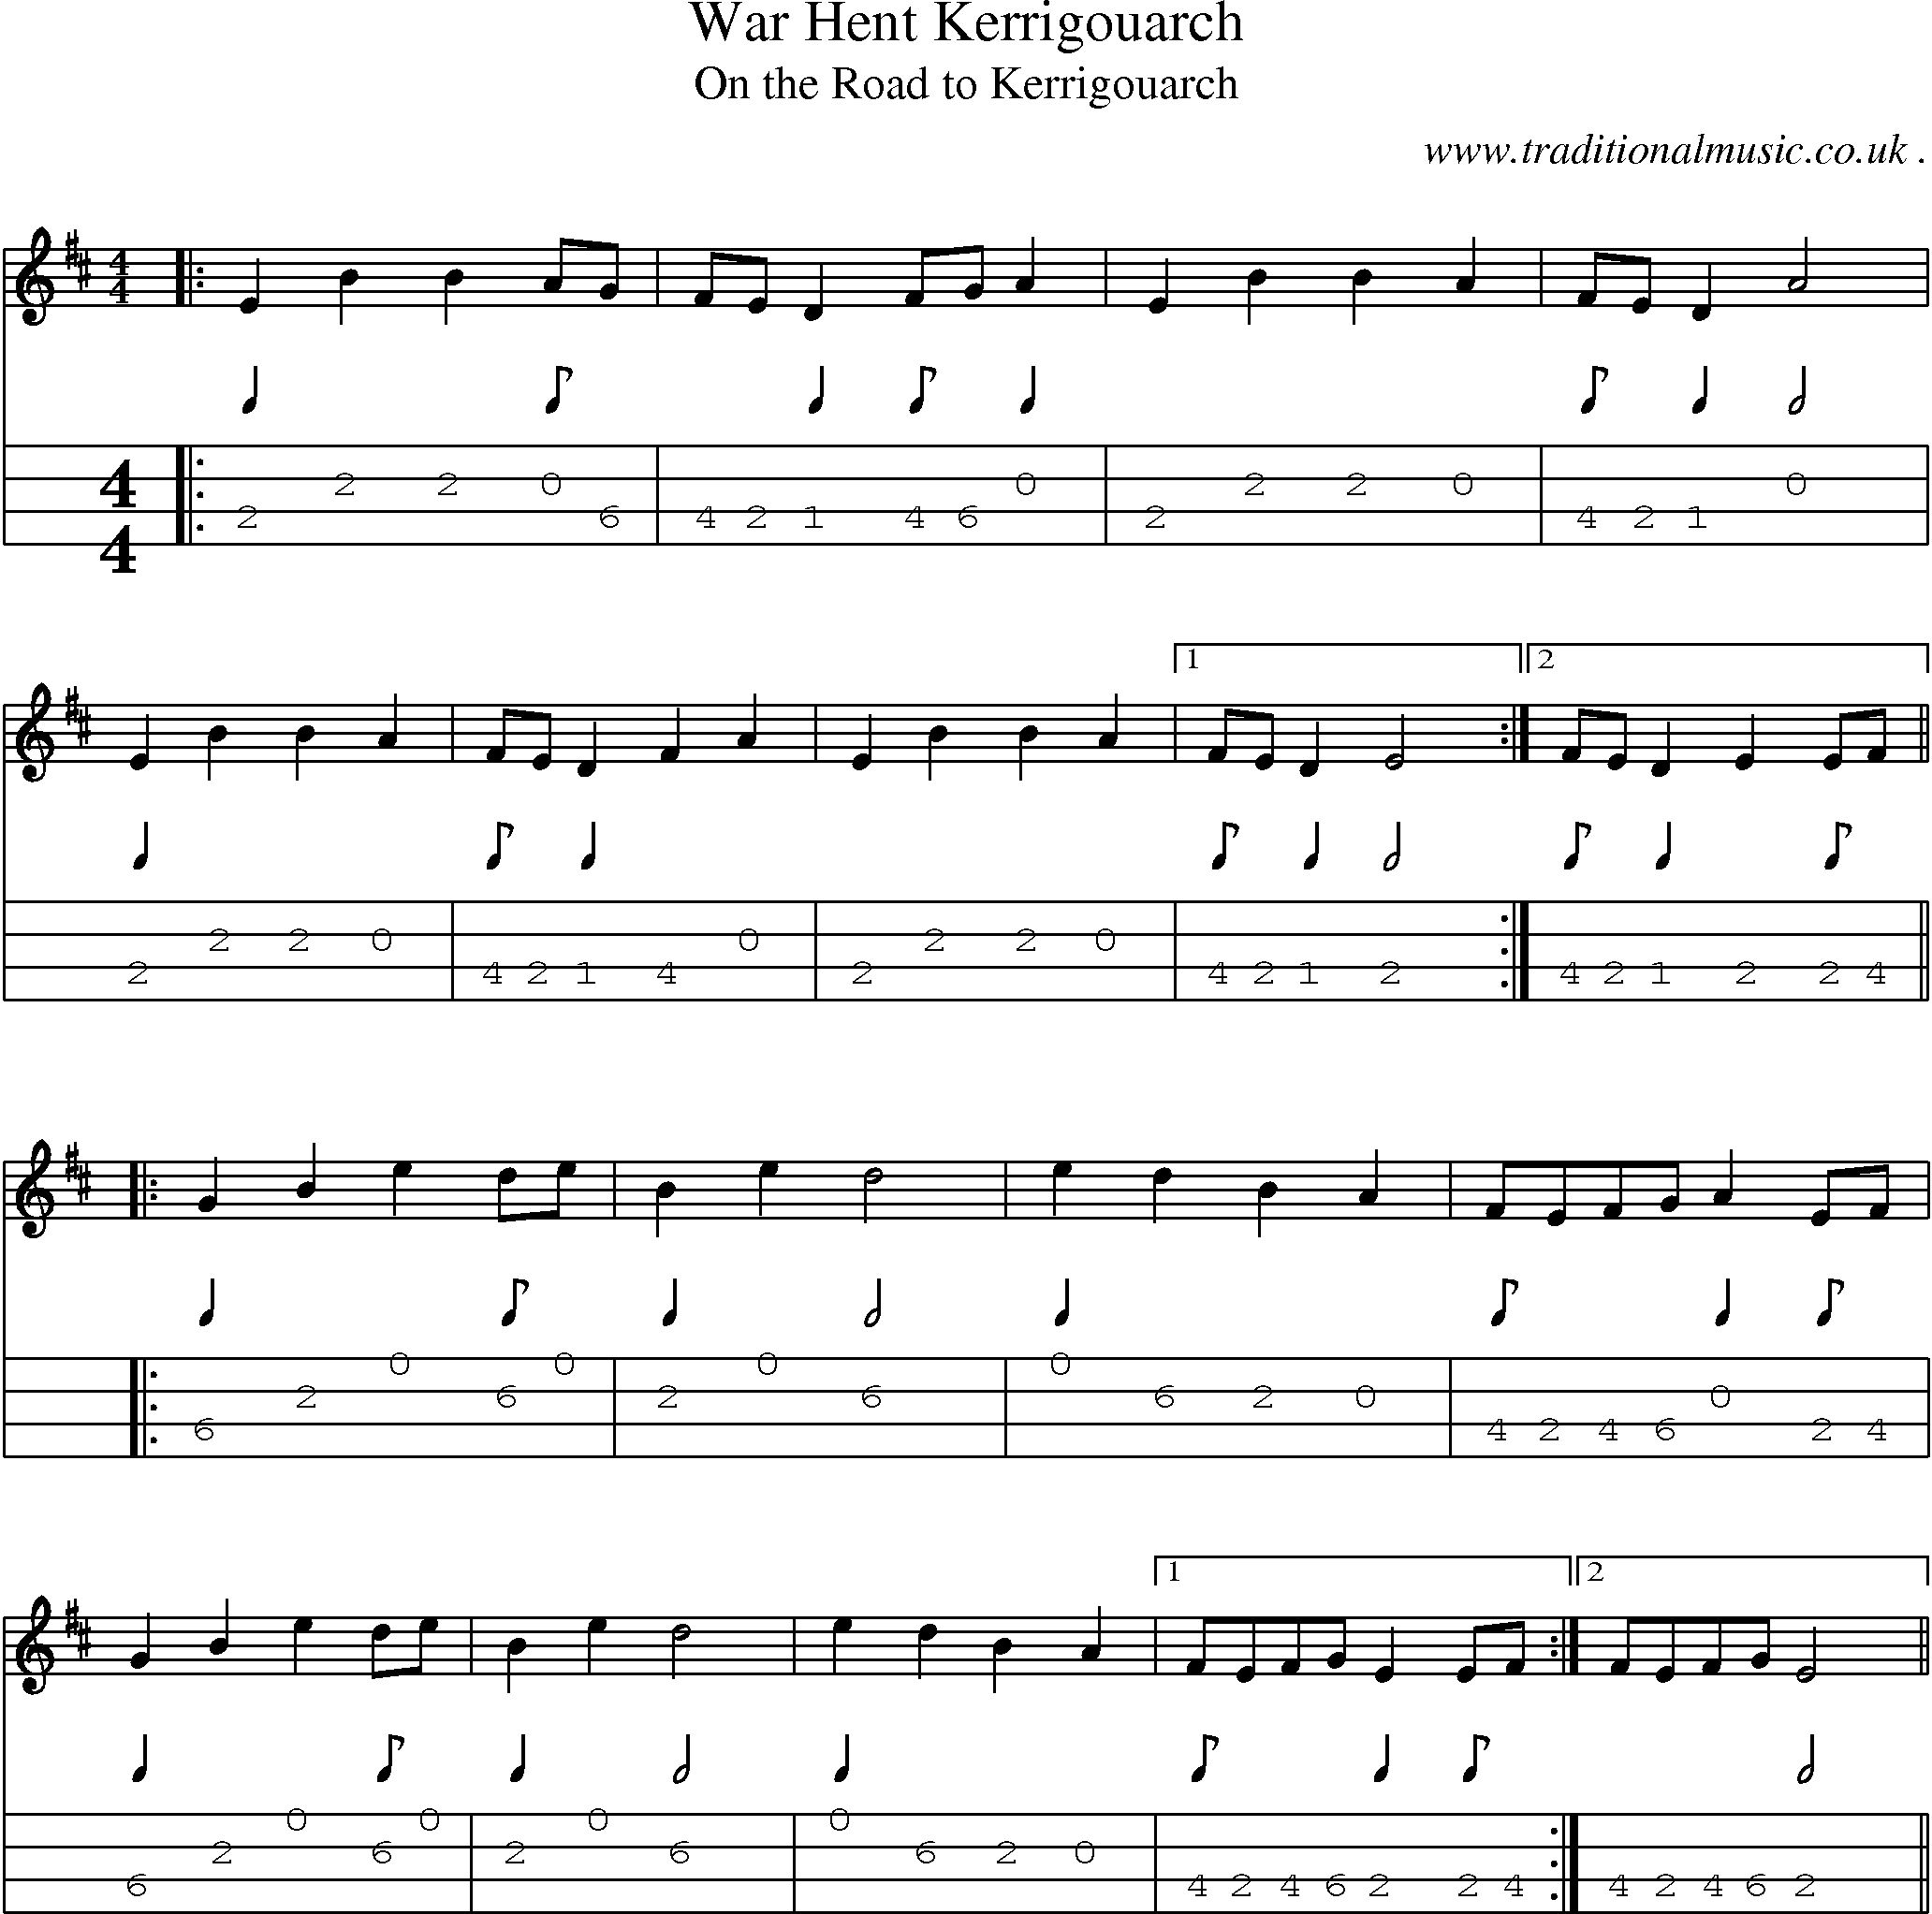 Sheet-Music and Mandolin Tabs for War Hent Kerrigouarch